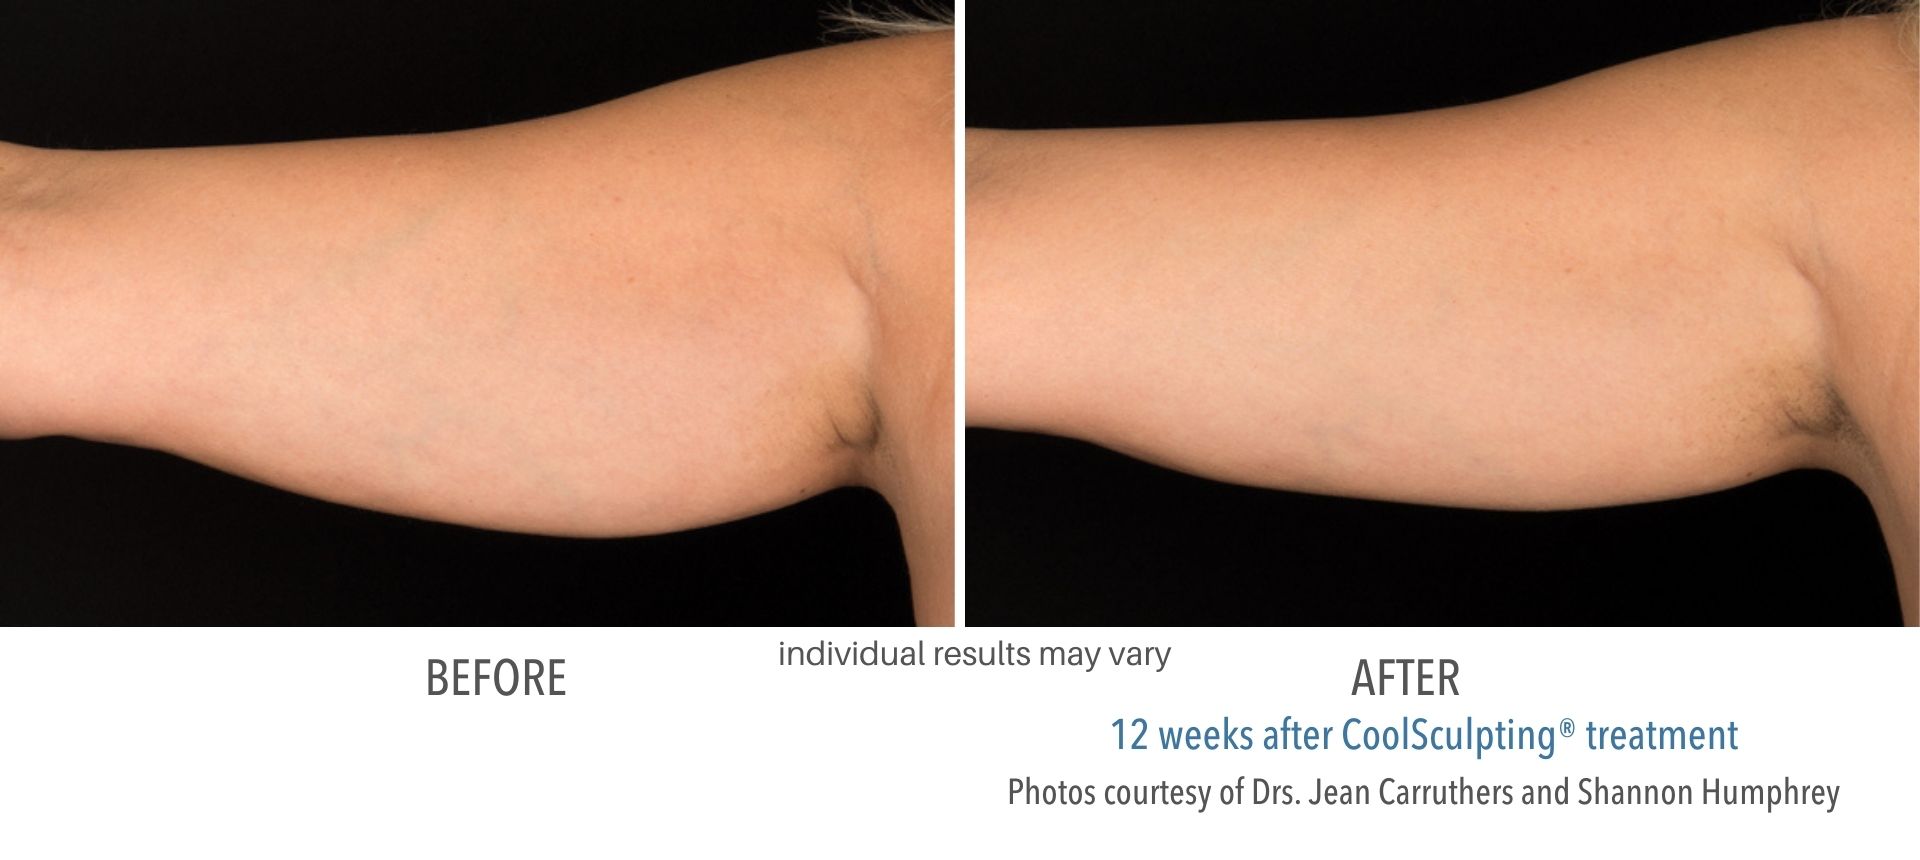 Under arms showing before and after results from CoolSculpting treatment in Salt Lake City, Utah.